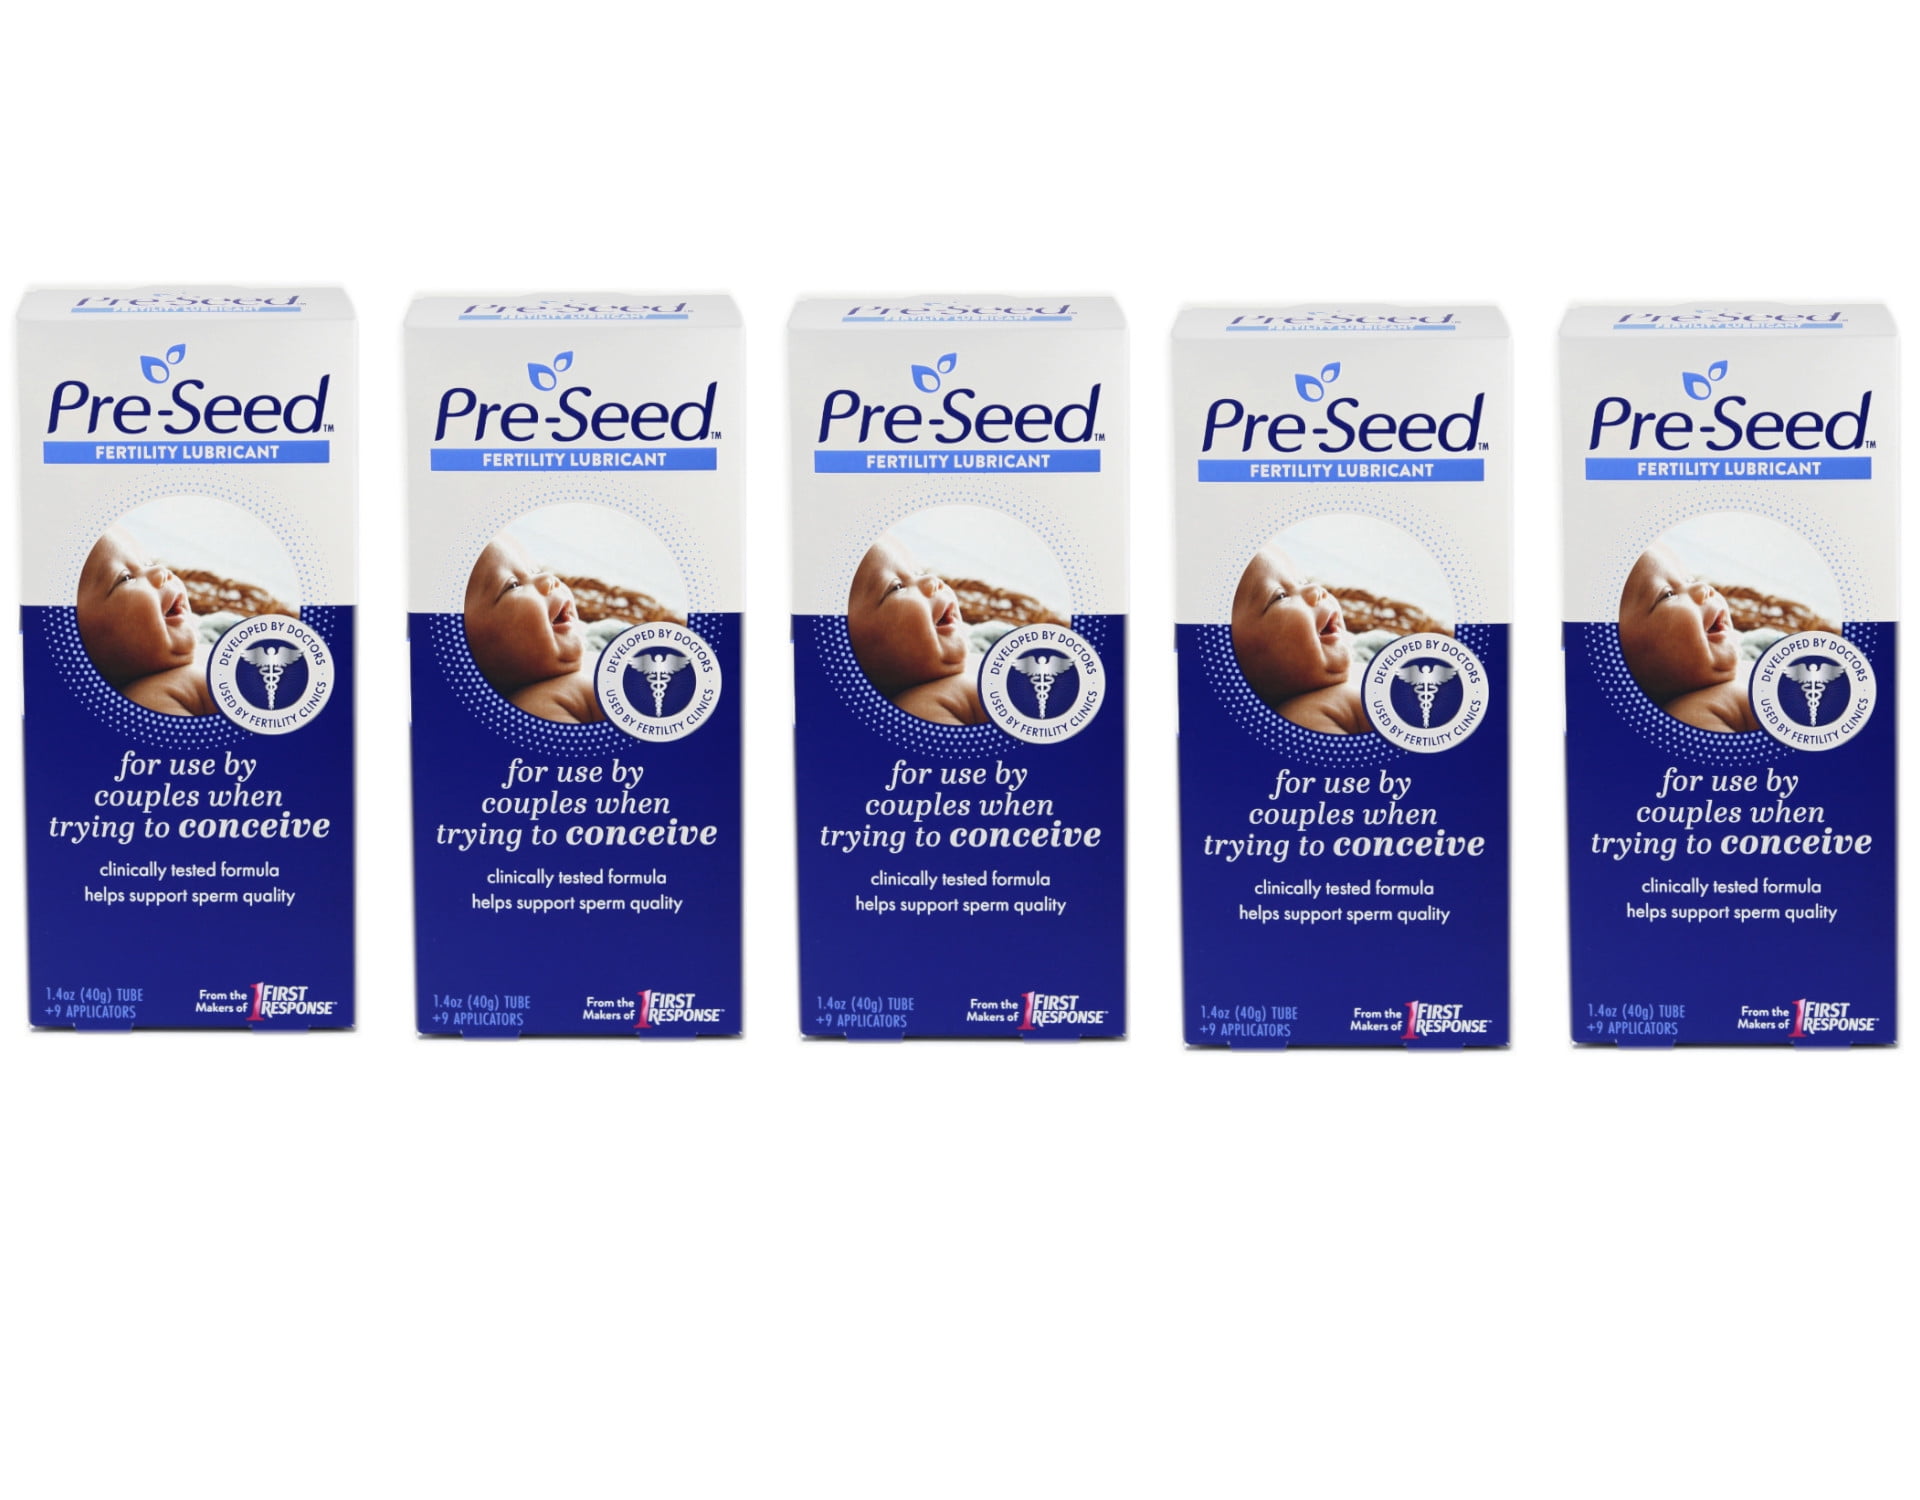 Pre-Seed Fertility-Friendly Lubricant Introduces New Packaging